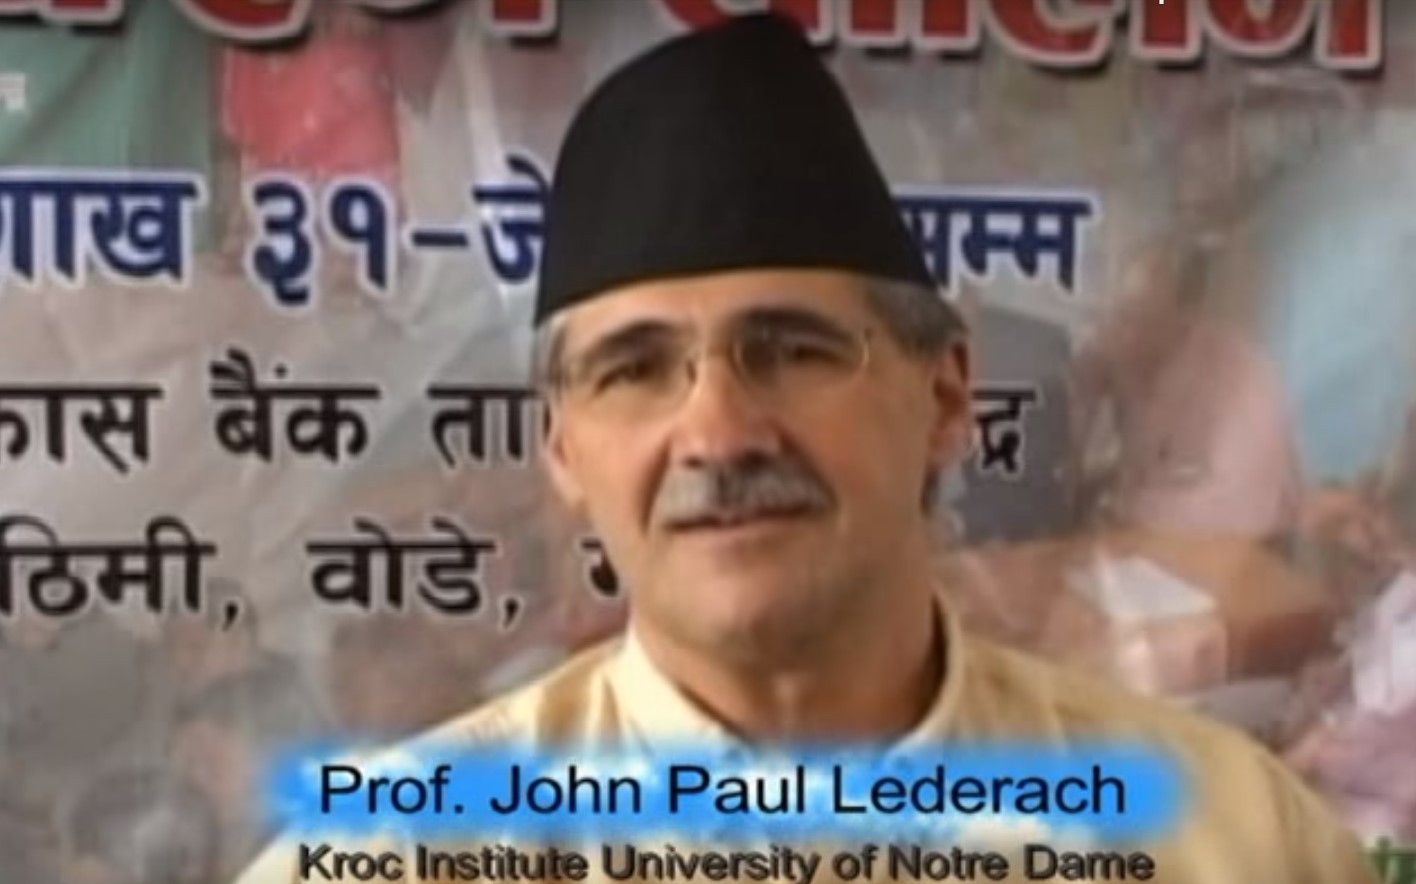 Prof John Paul Lederach's Views on Conflict Transformation Movement in Nepal